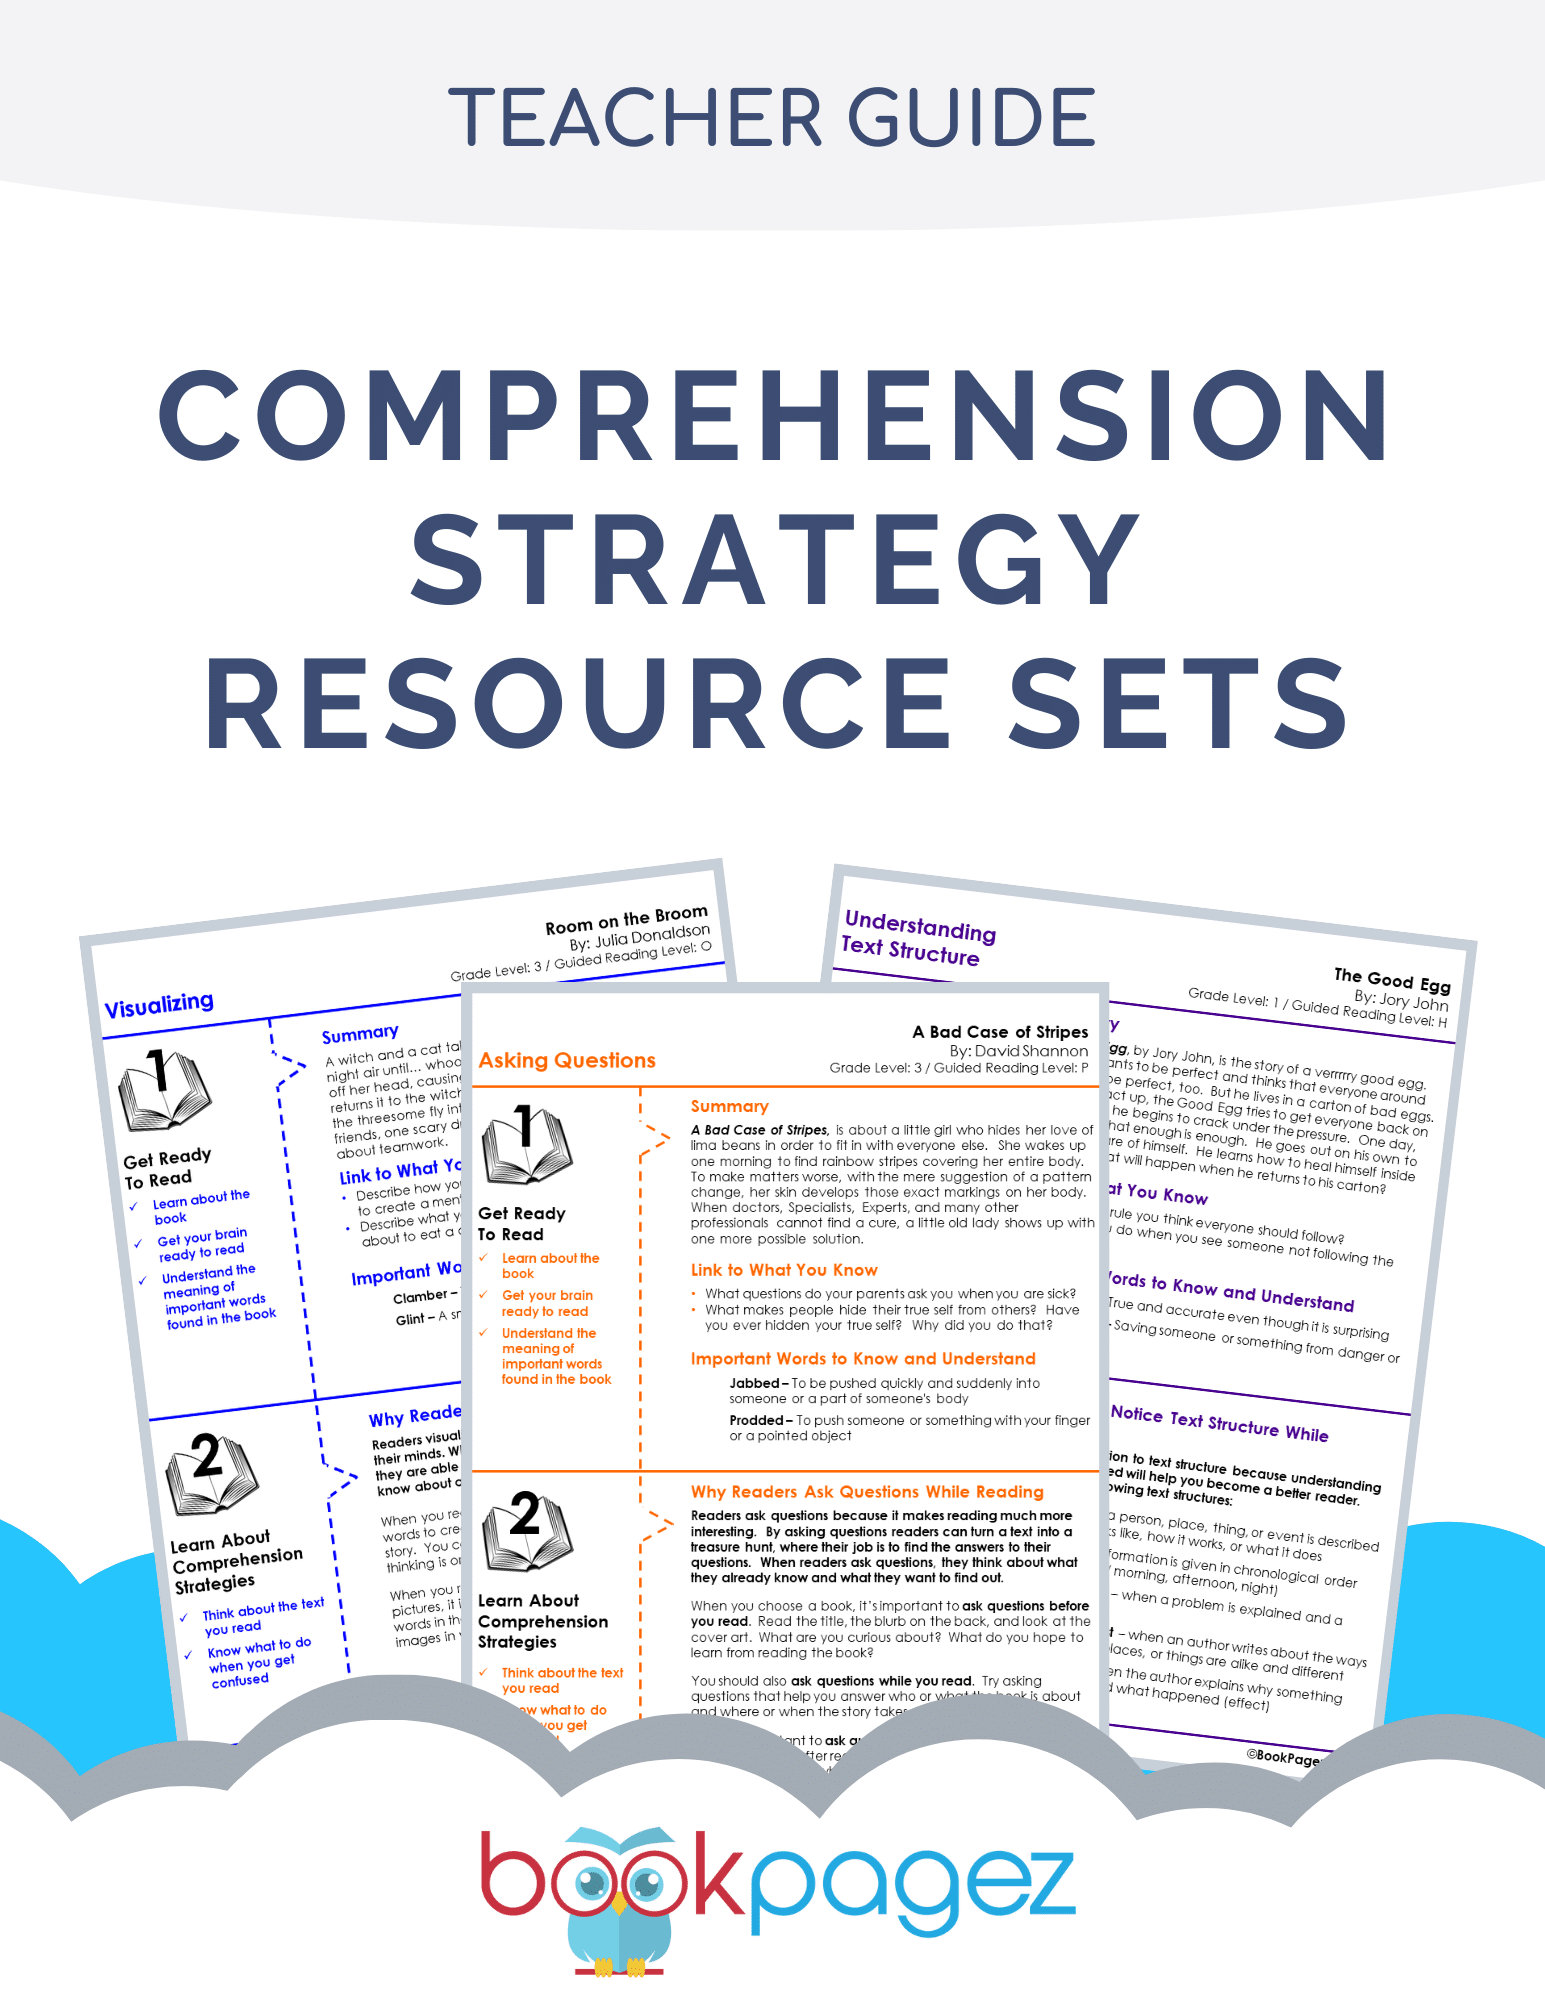 Cover for the Comprehension Strategy Resource Sets Teacher Guide